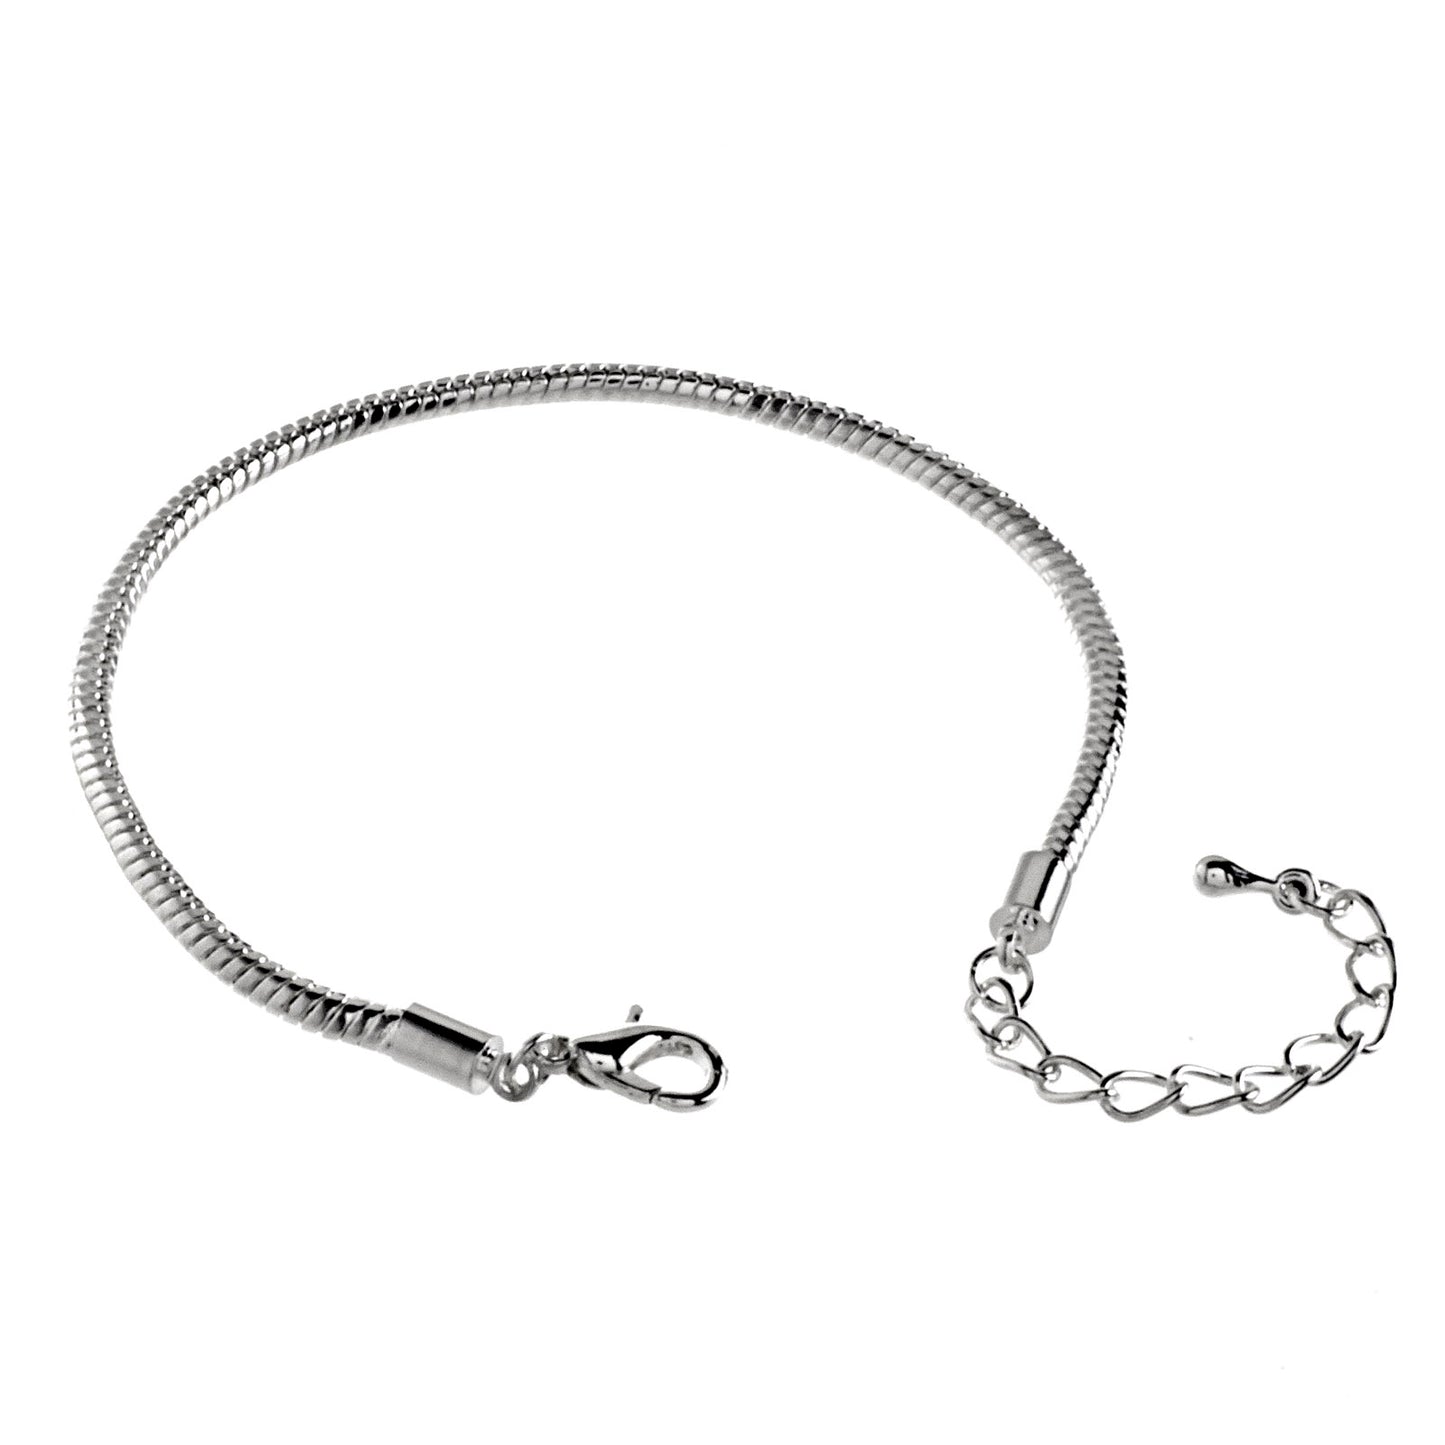 ELYA Women's Silver Plated Snake Chain Charm Bracelet with Extension